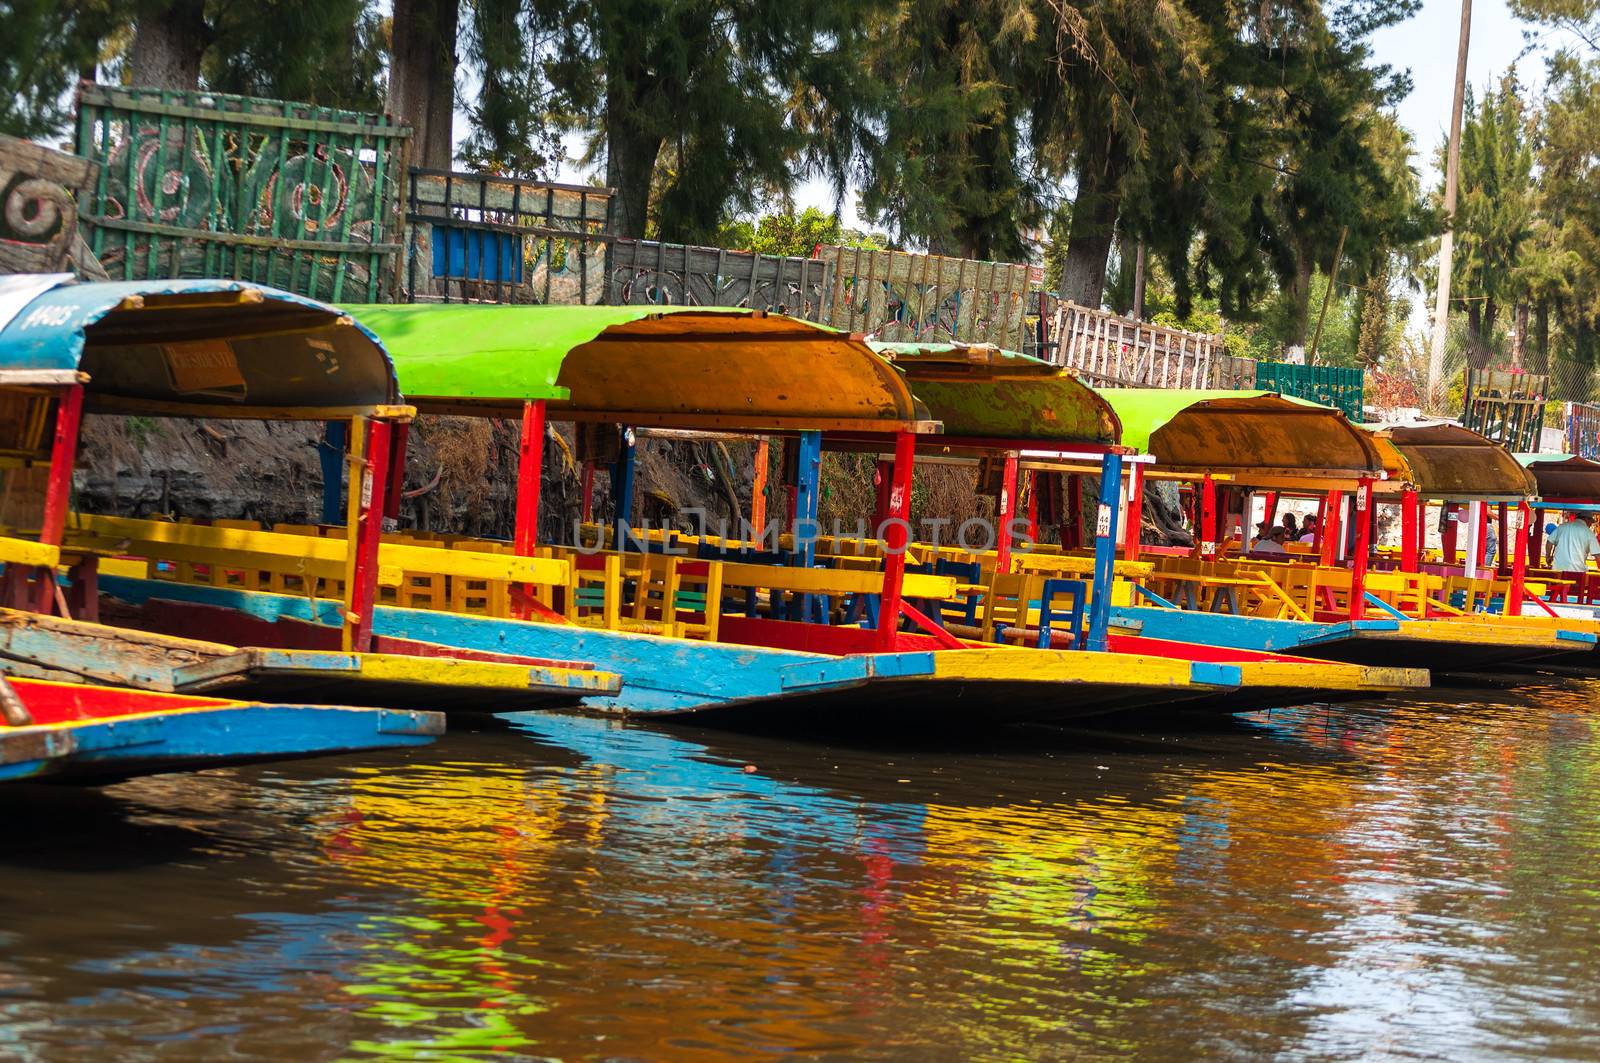 Bright colorful boats on the Xochimilco canal in Mexico City